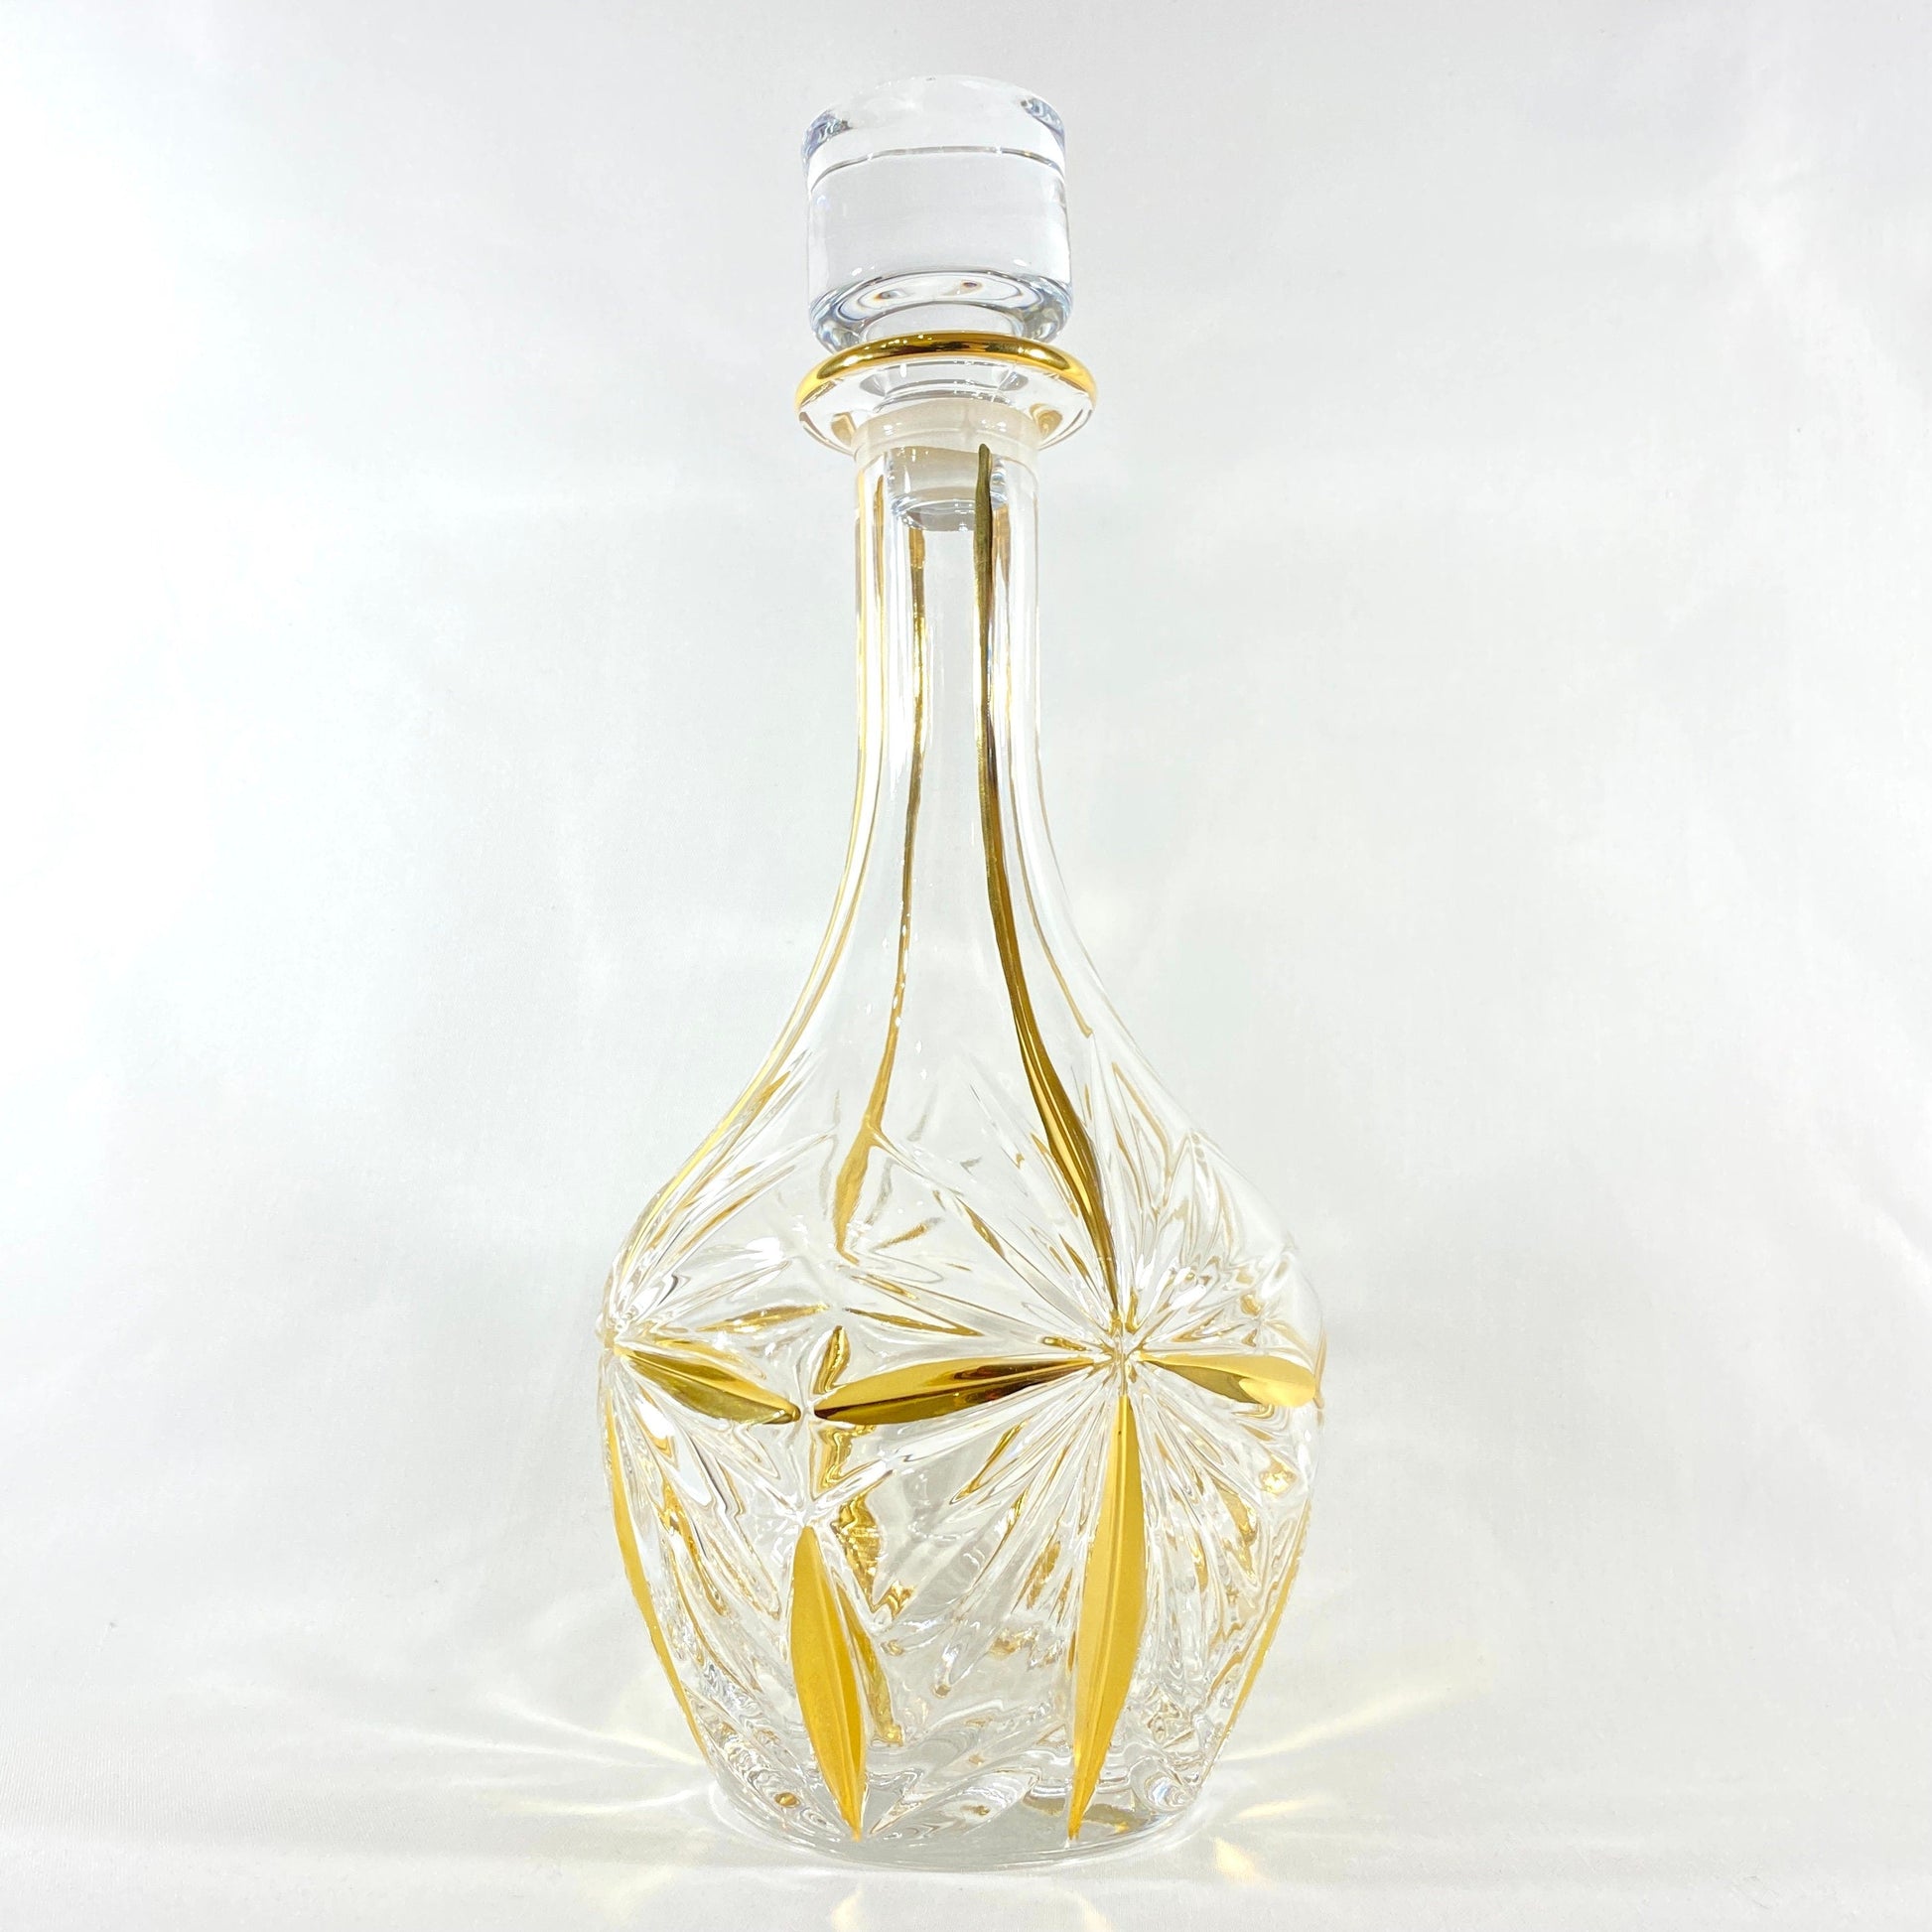 Gold Whiskey Decanter, 24kt Gold Venetian Glass Whiskey Decanter  - Handmade in Italy, Colorful Murano Glass